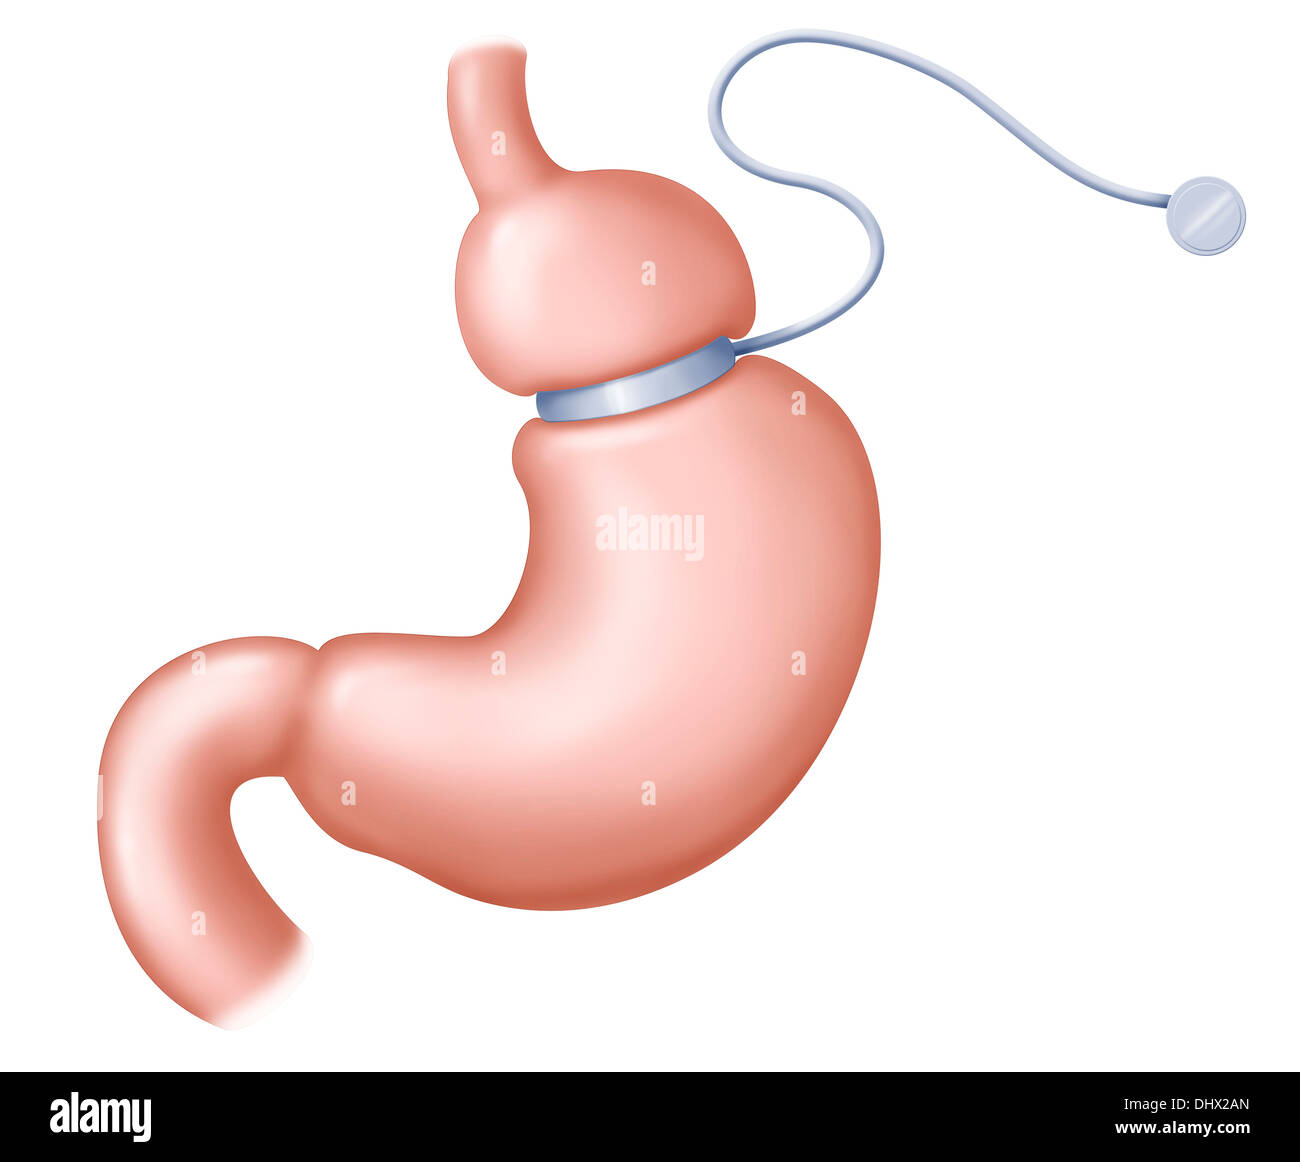 GASTRIC BAND Stock Photo